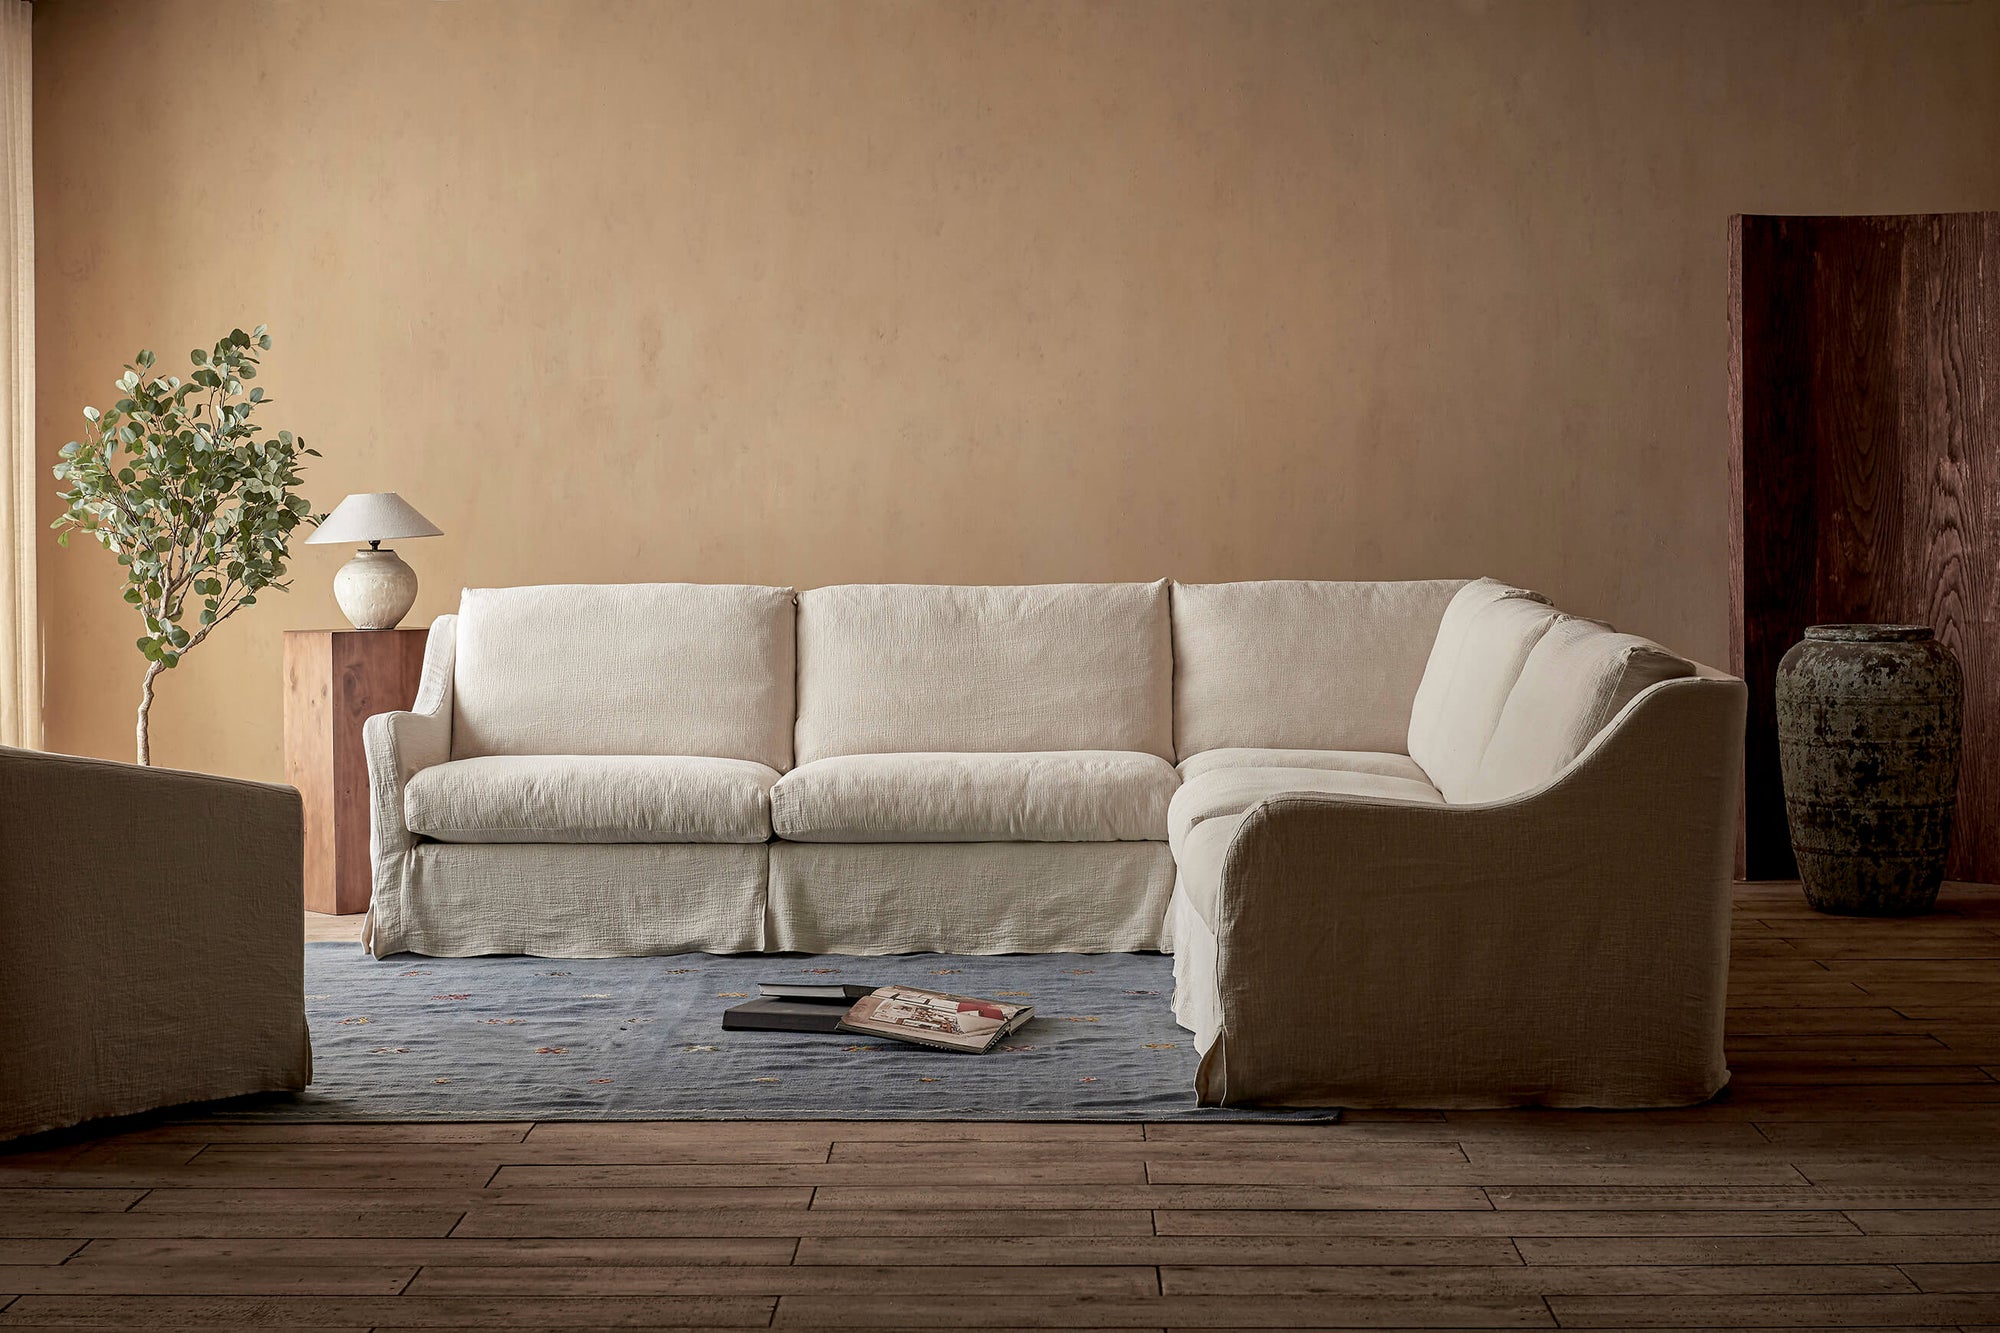 Esmé Corner Sectional Sofa in Corn Silk, a light beige Washed Cotton Linen, placed in a sunlit room decorated with a table lamp and a stack of books on the floor